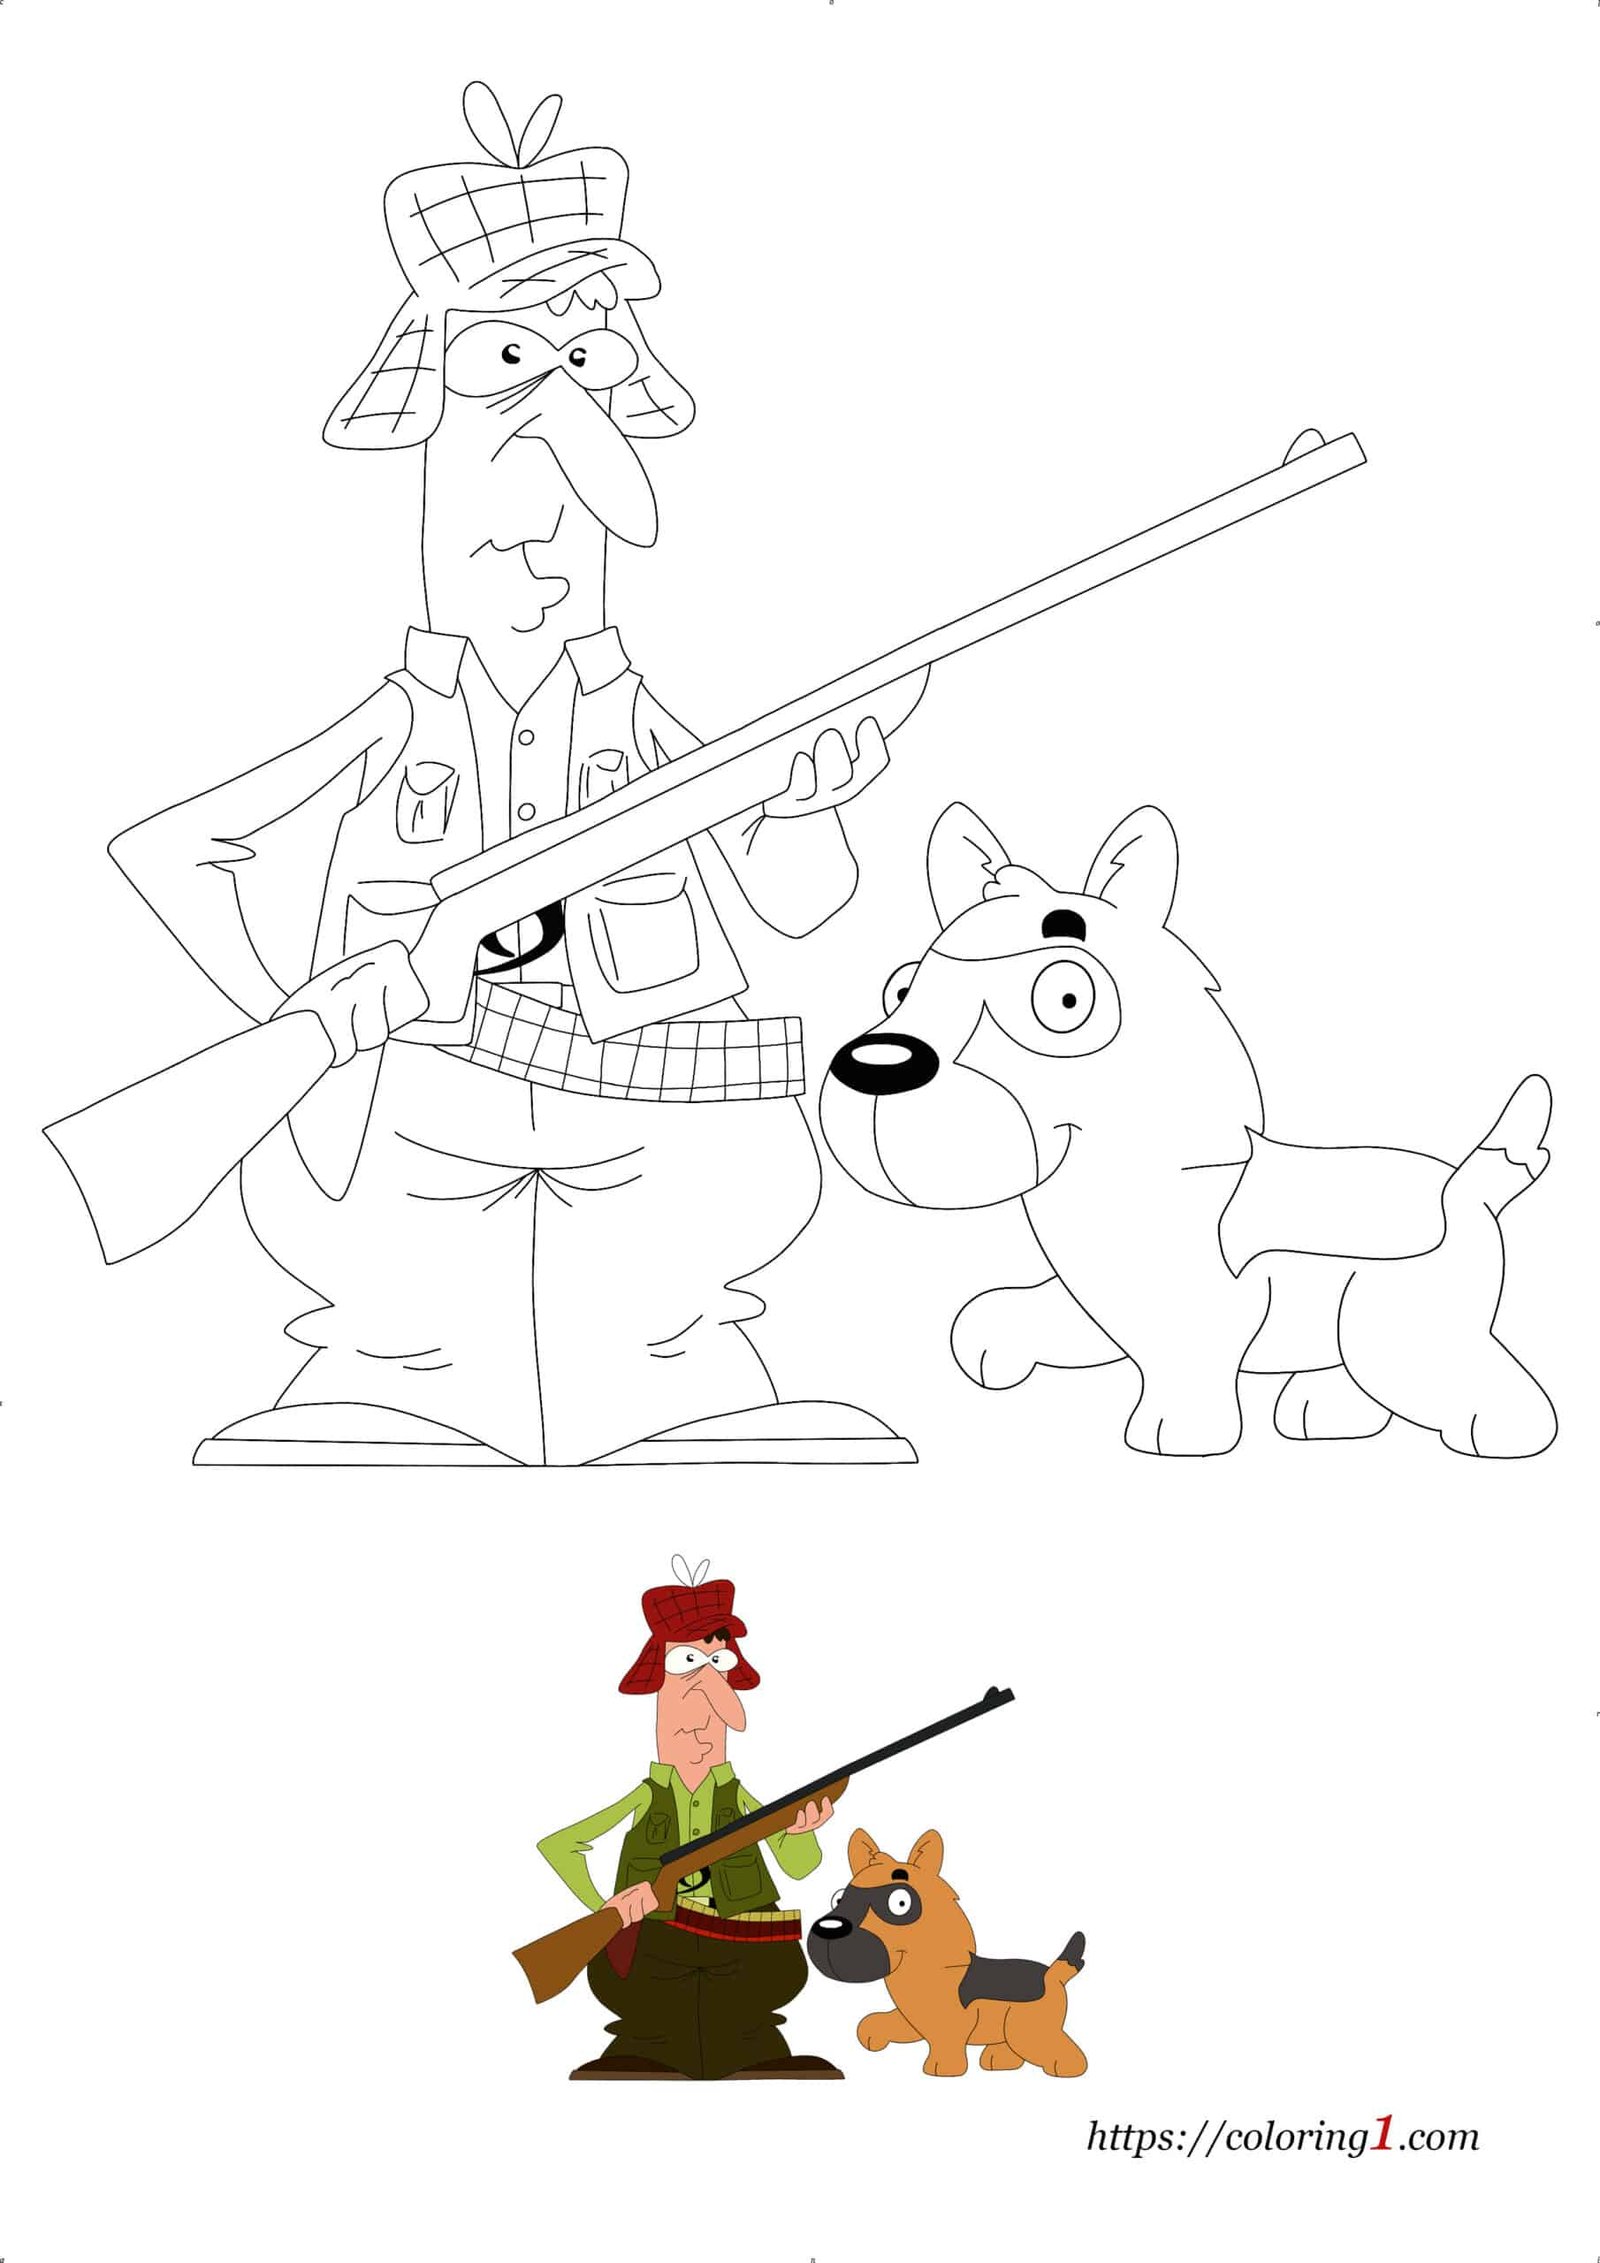 Hunter with Hunting Dog coloring page for boys and girls